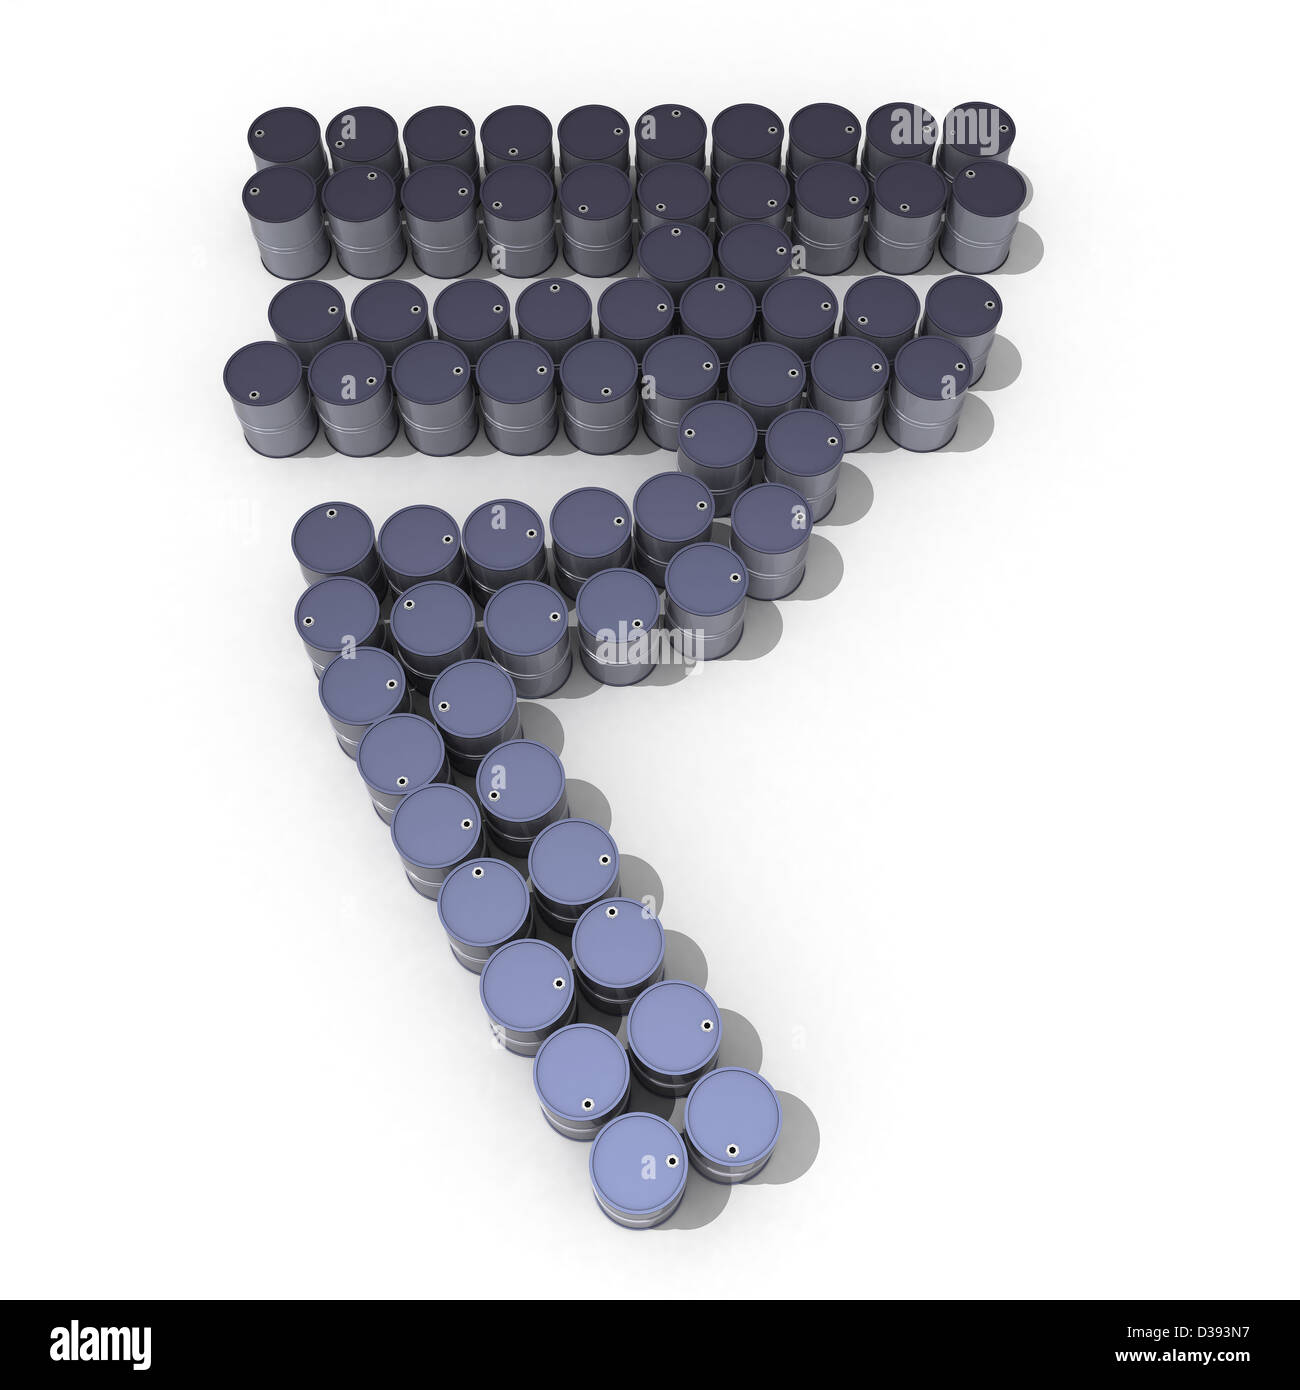 Oil drums in form of Indian rupee symbol Stock Photo